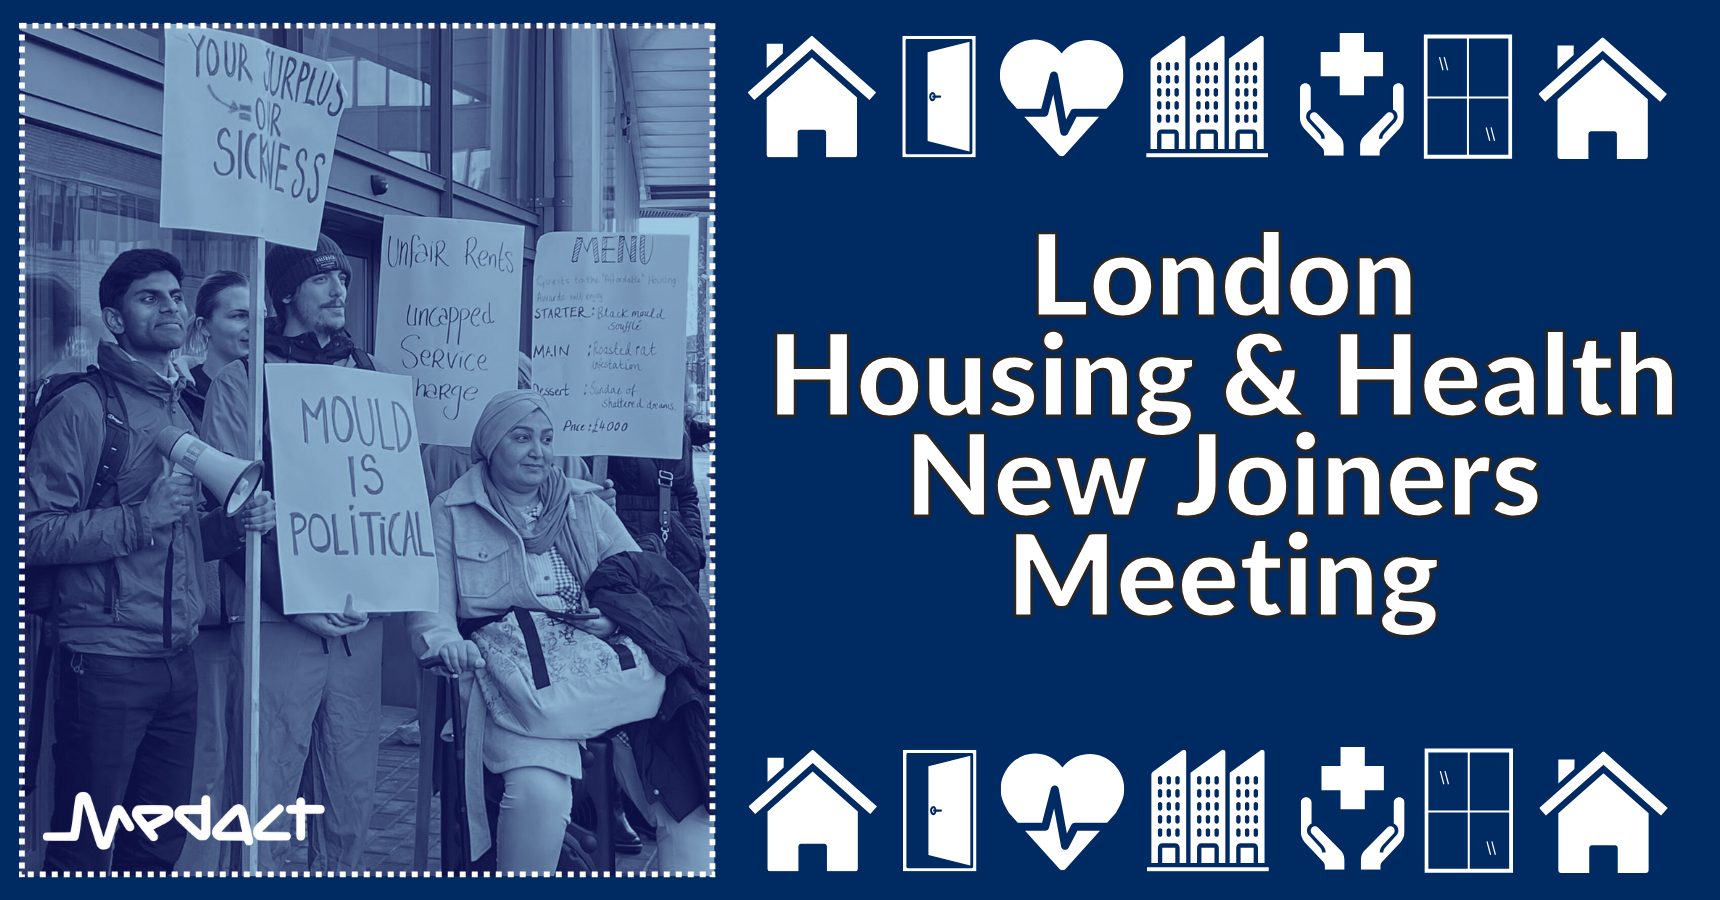 London Housing & Health New Joiners meeting